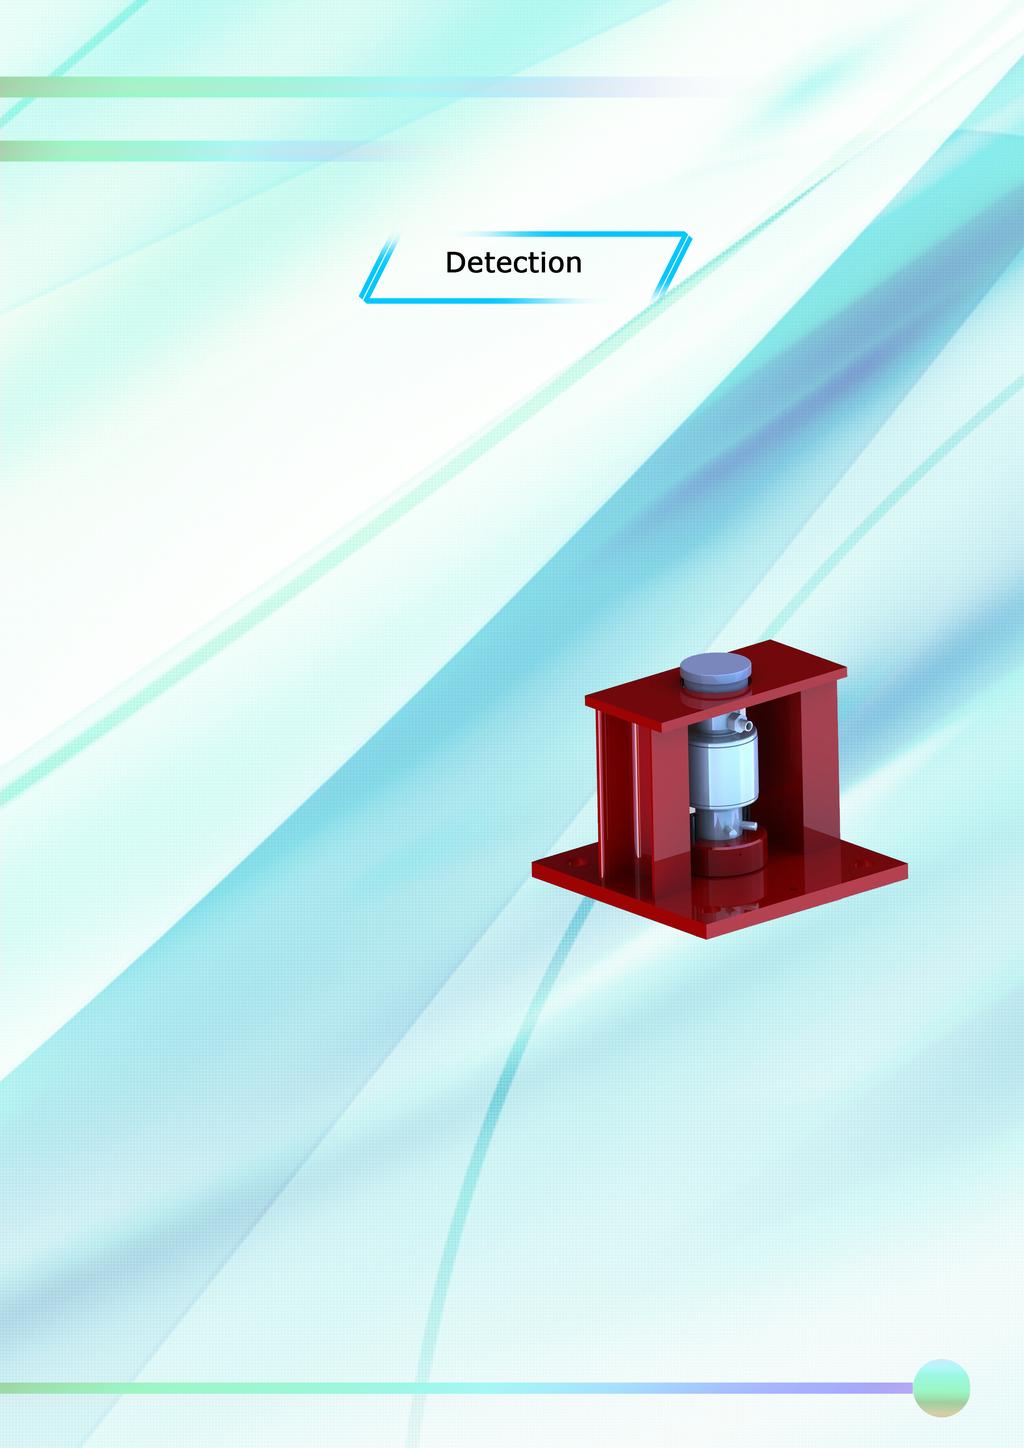 www.rayennur.com L Deteeti on l LOADCELL Load cell structures used in Weigh-ln-Motion Systems may vary depending on application or buyer's specifications.